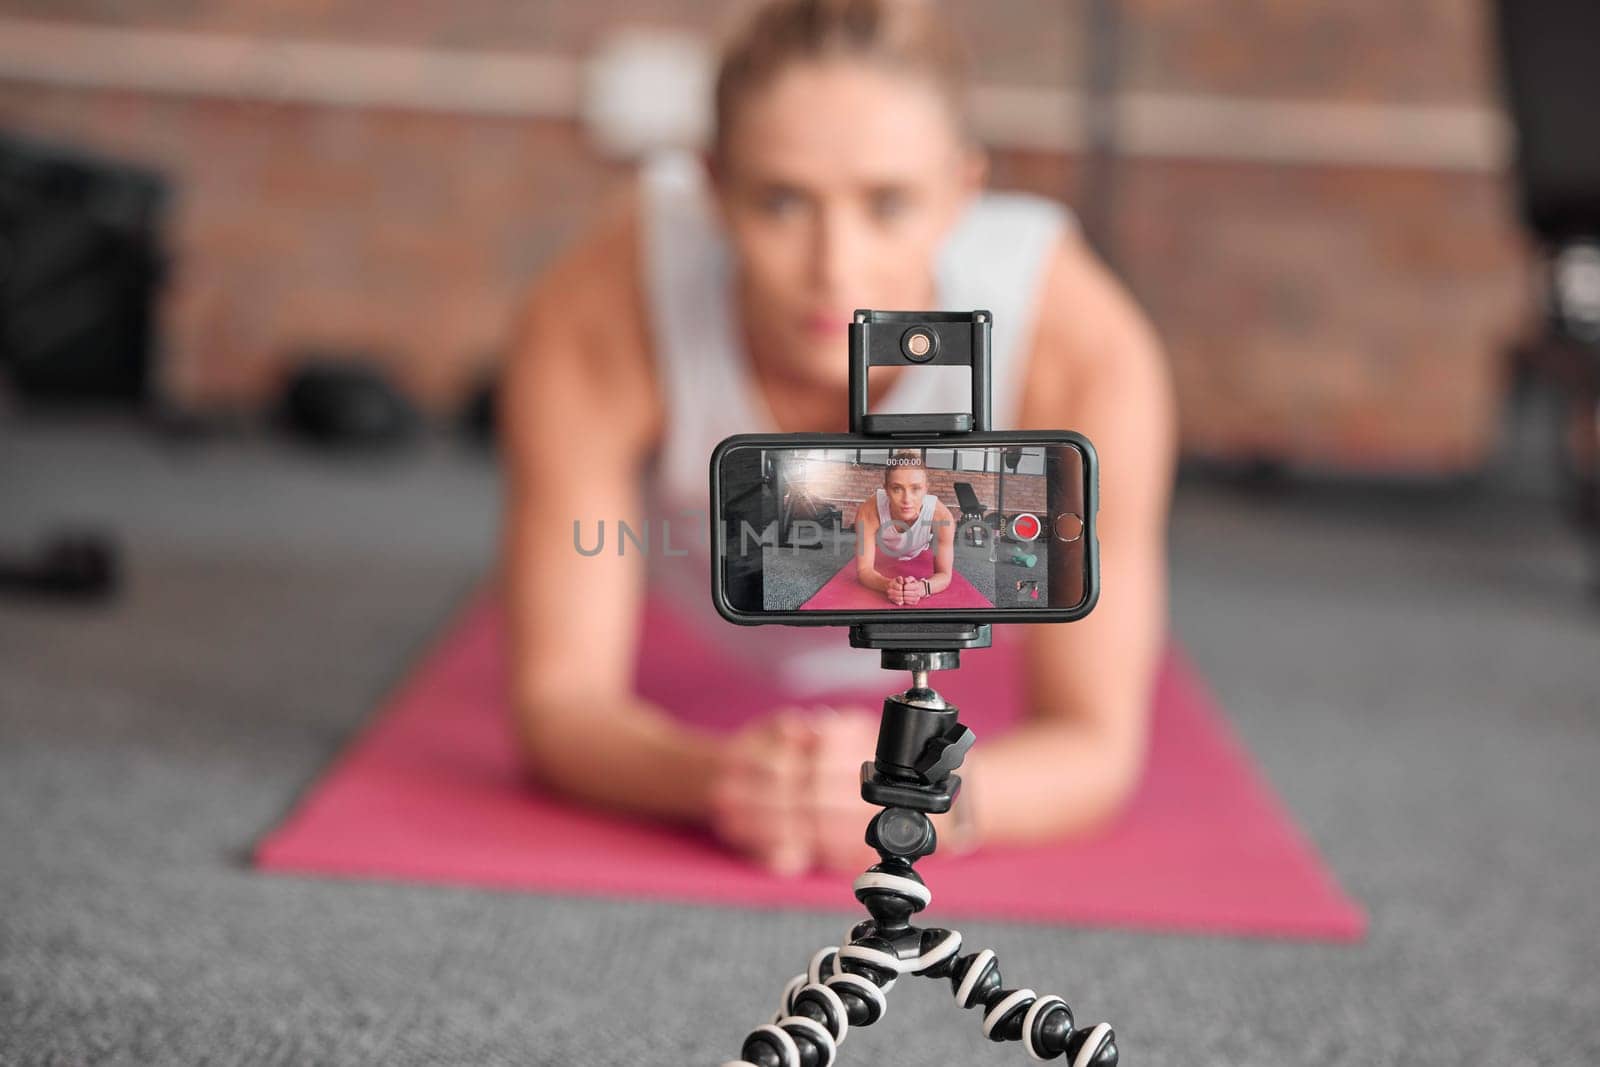 Live streaming, fitness and phone of woman exercise, pilates or workout on social media or video platform on tripod. Gen z athlete, sports influencer or content creator training on smartphone screen by YuriArcurs